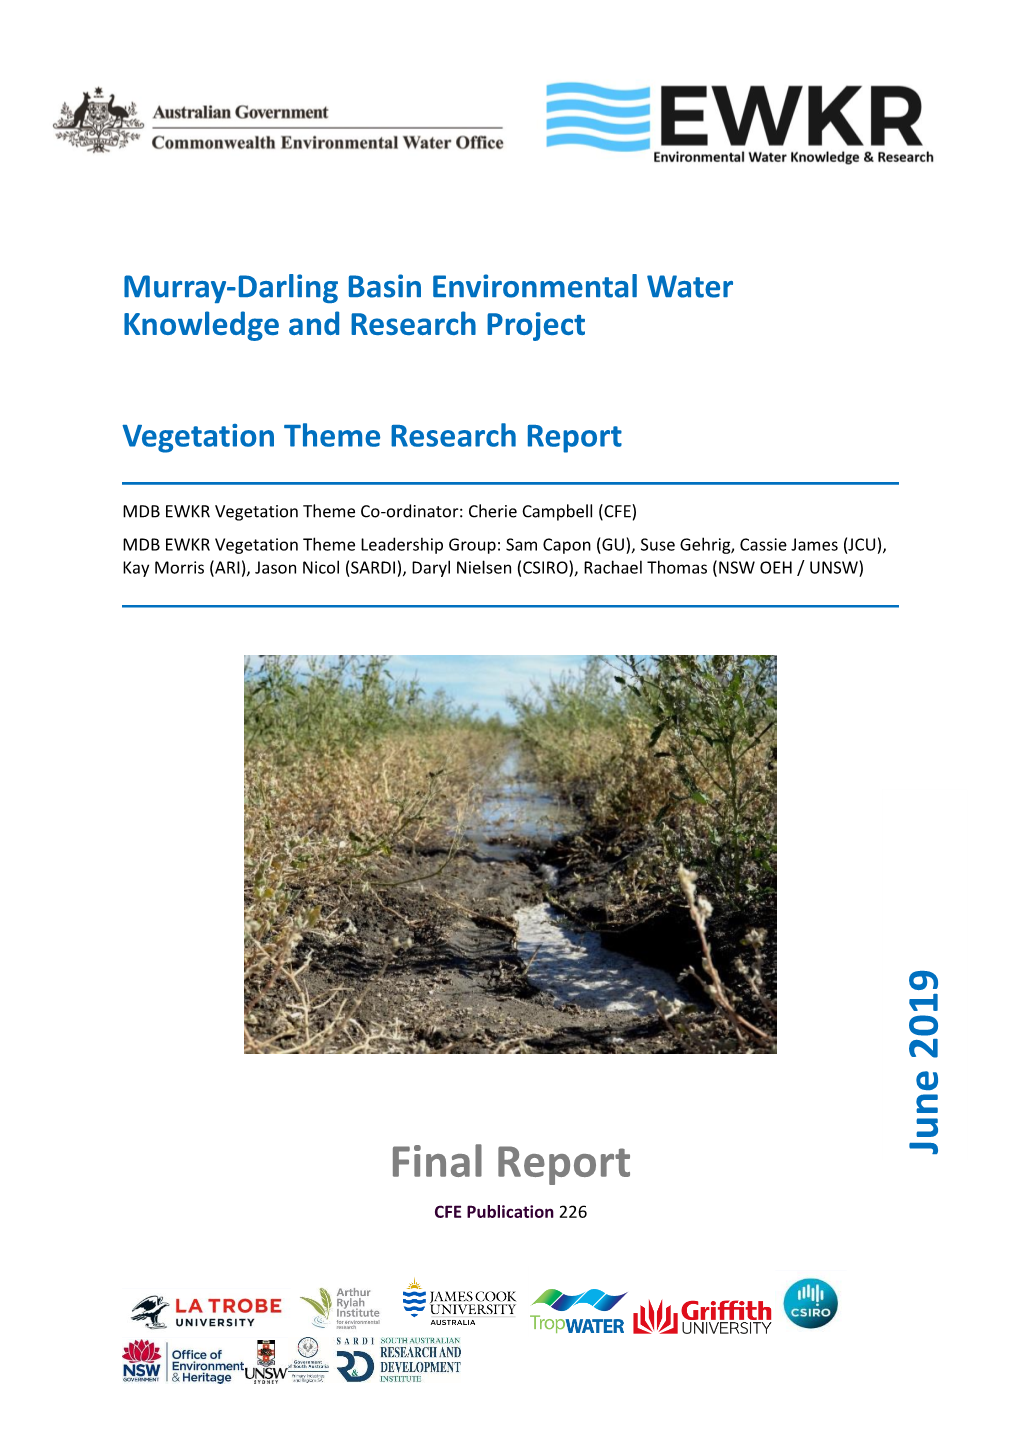 Murray-Darling Basin Environmental Water Knowledge and Research Project